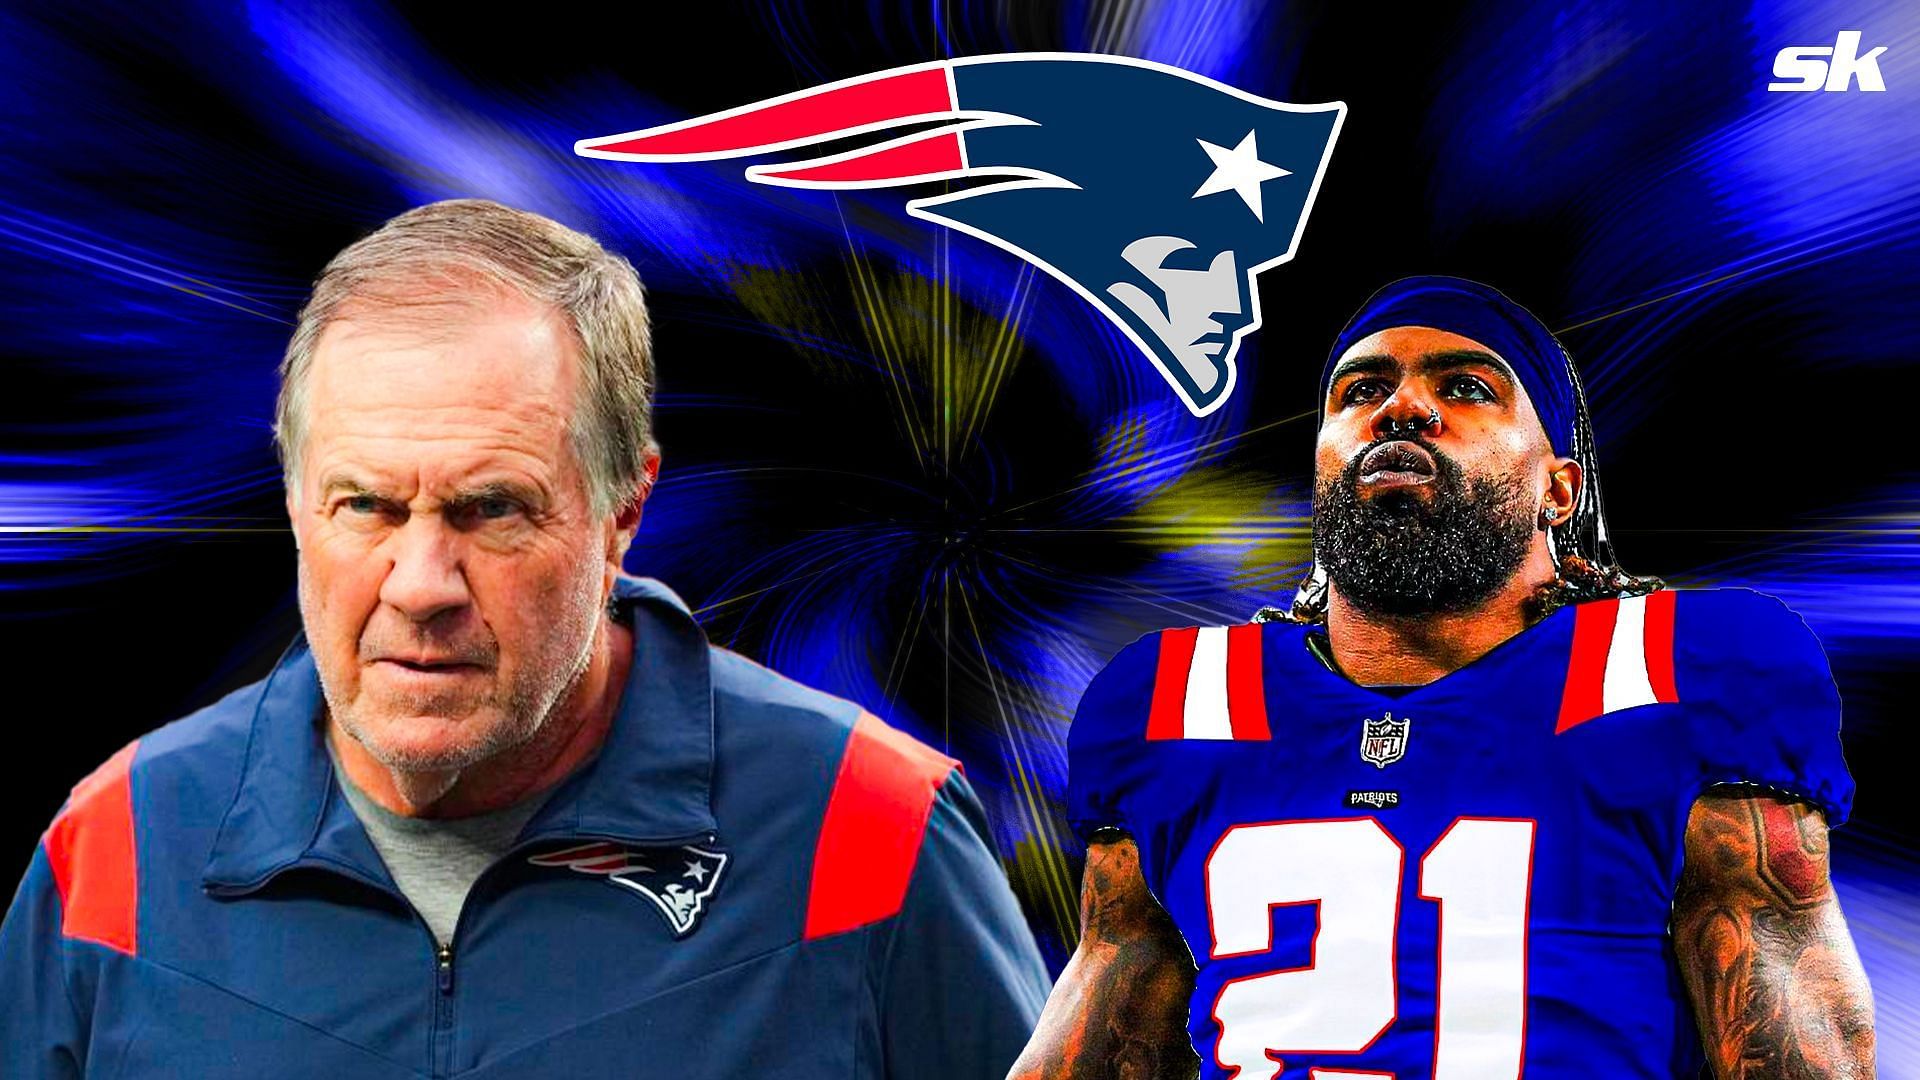 Ezekiel Elliott is expected to sign a one-year deal to play for New England Patriots head coach Bill Belichick.